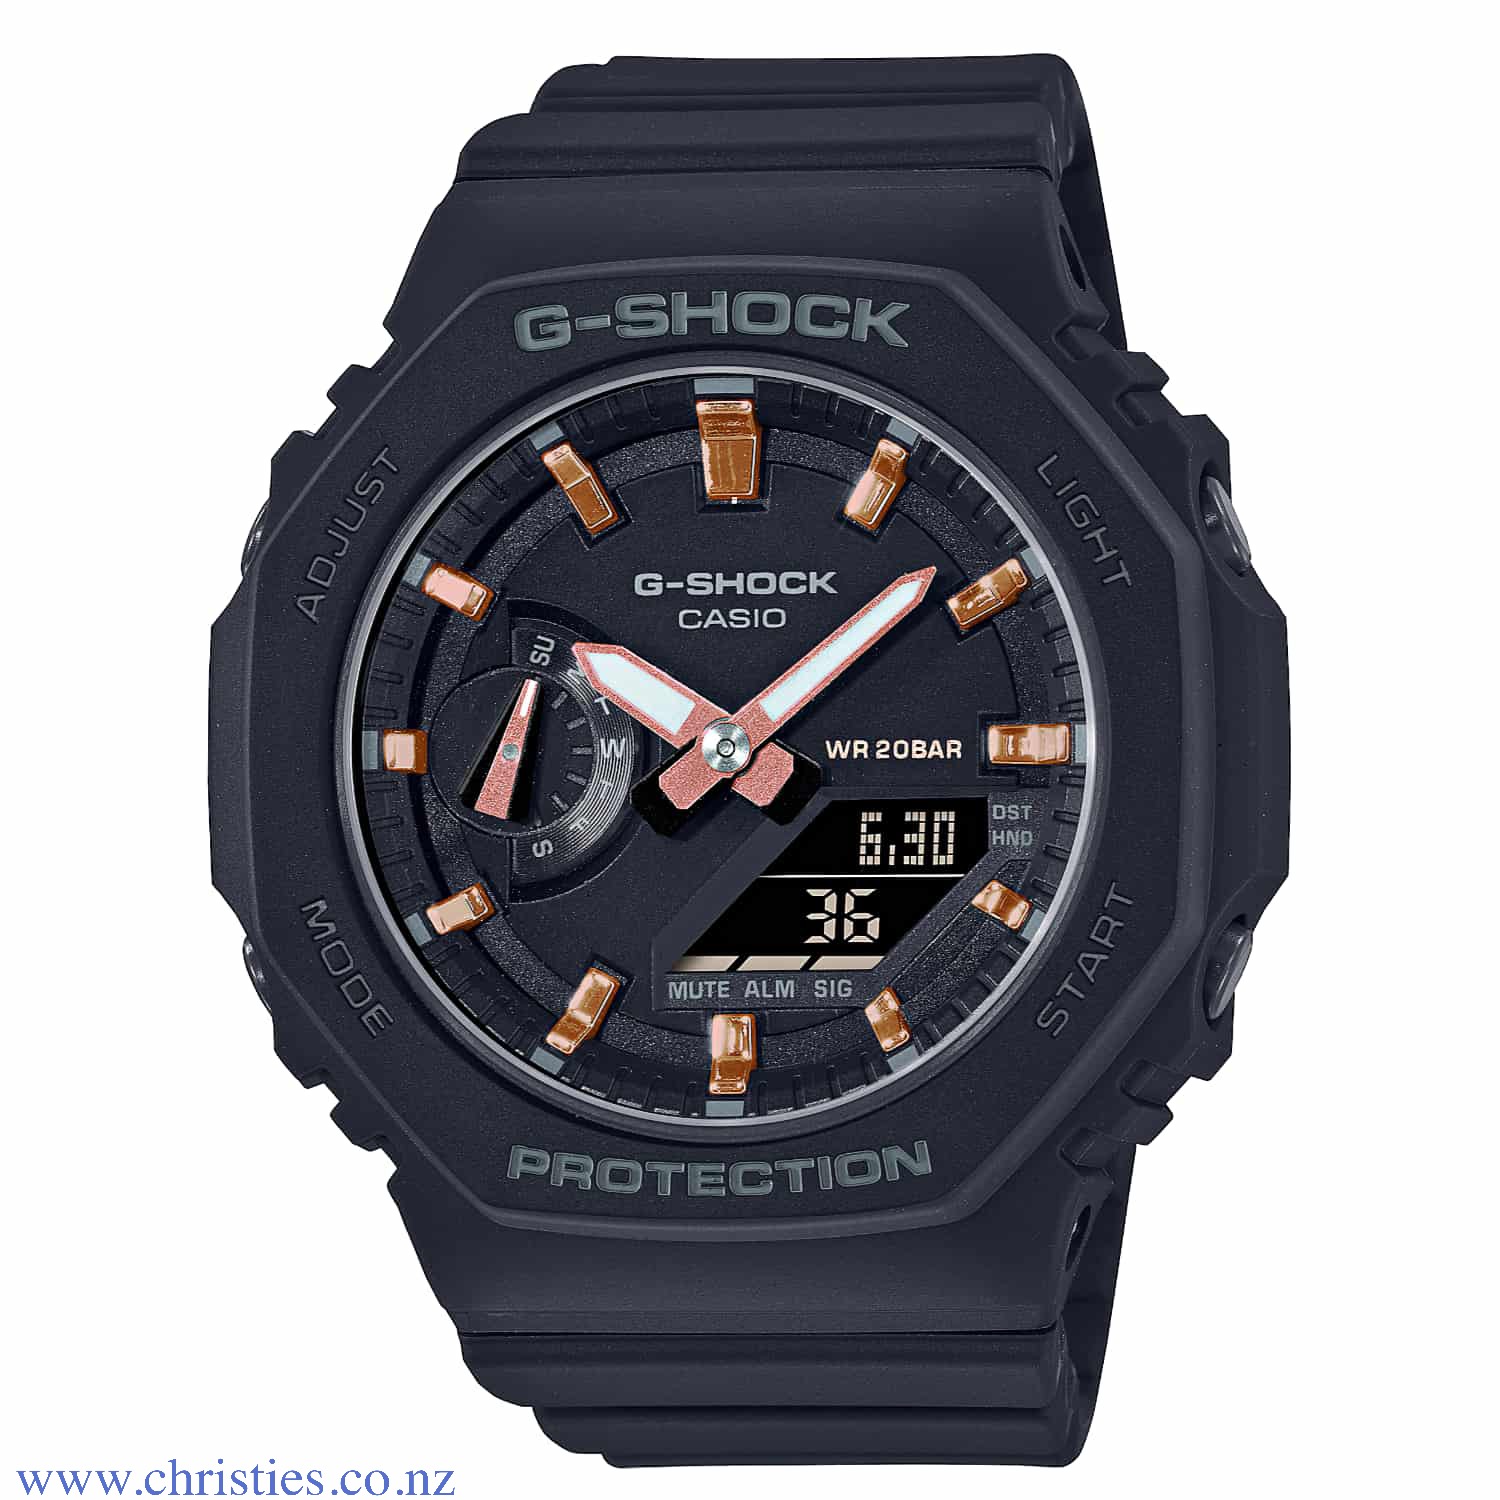 GMAS2100-1A G-SHOCK Carbon Core Womens Watch. A new G-Shock GMA-S2100 series from Casio. The watches look just like smaller versions of the popular carbon core GA-2100 series but with colour schemes for women.  These new models (Oct 2019)  inherit th @chr